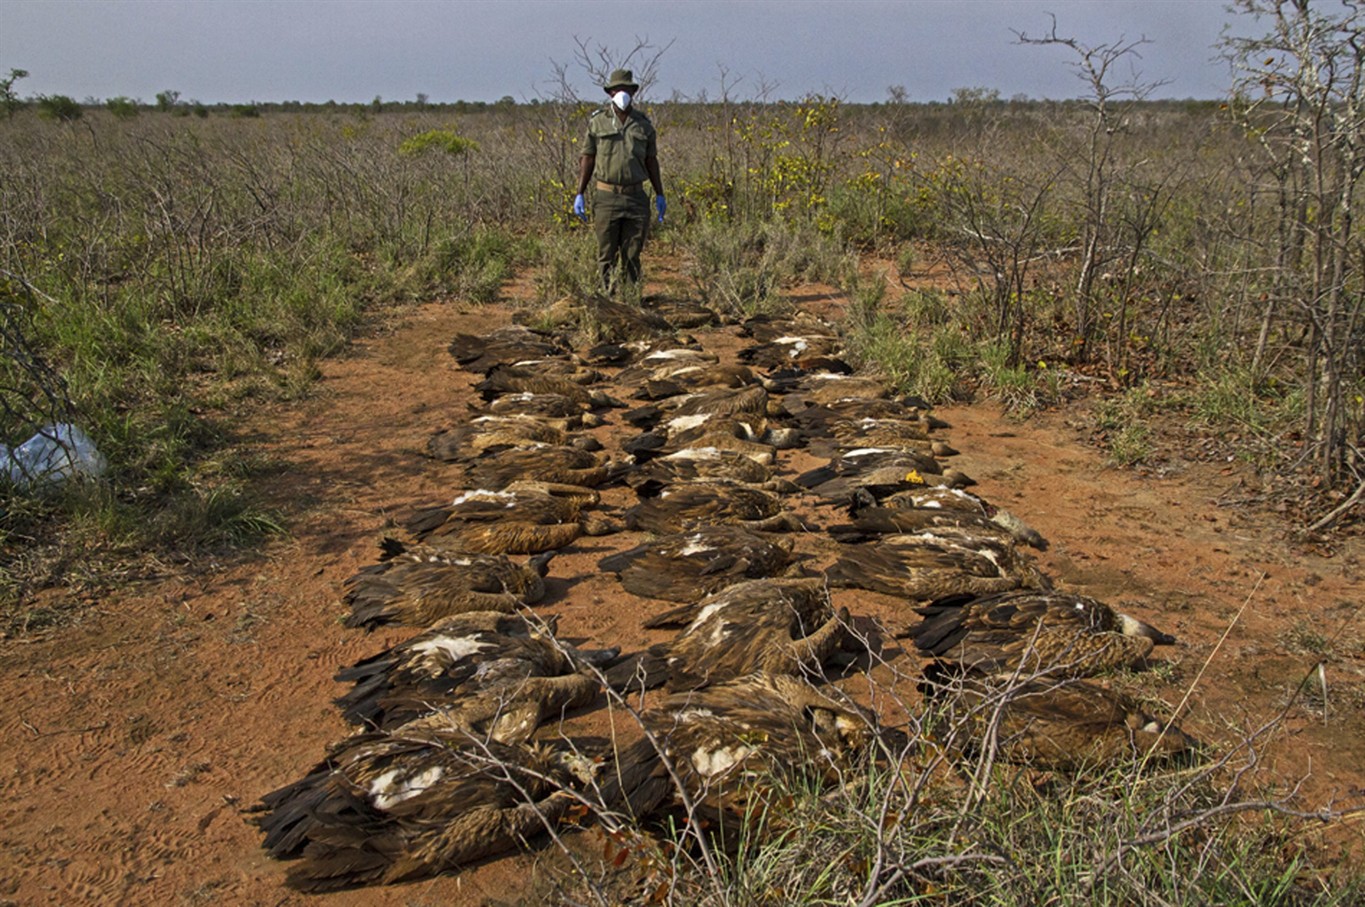 Poachers target Africa's lions, vultures with poison - 680 NEWS